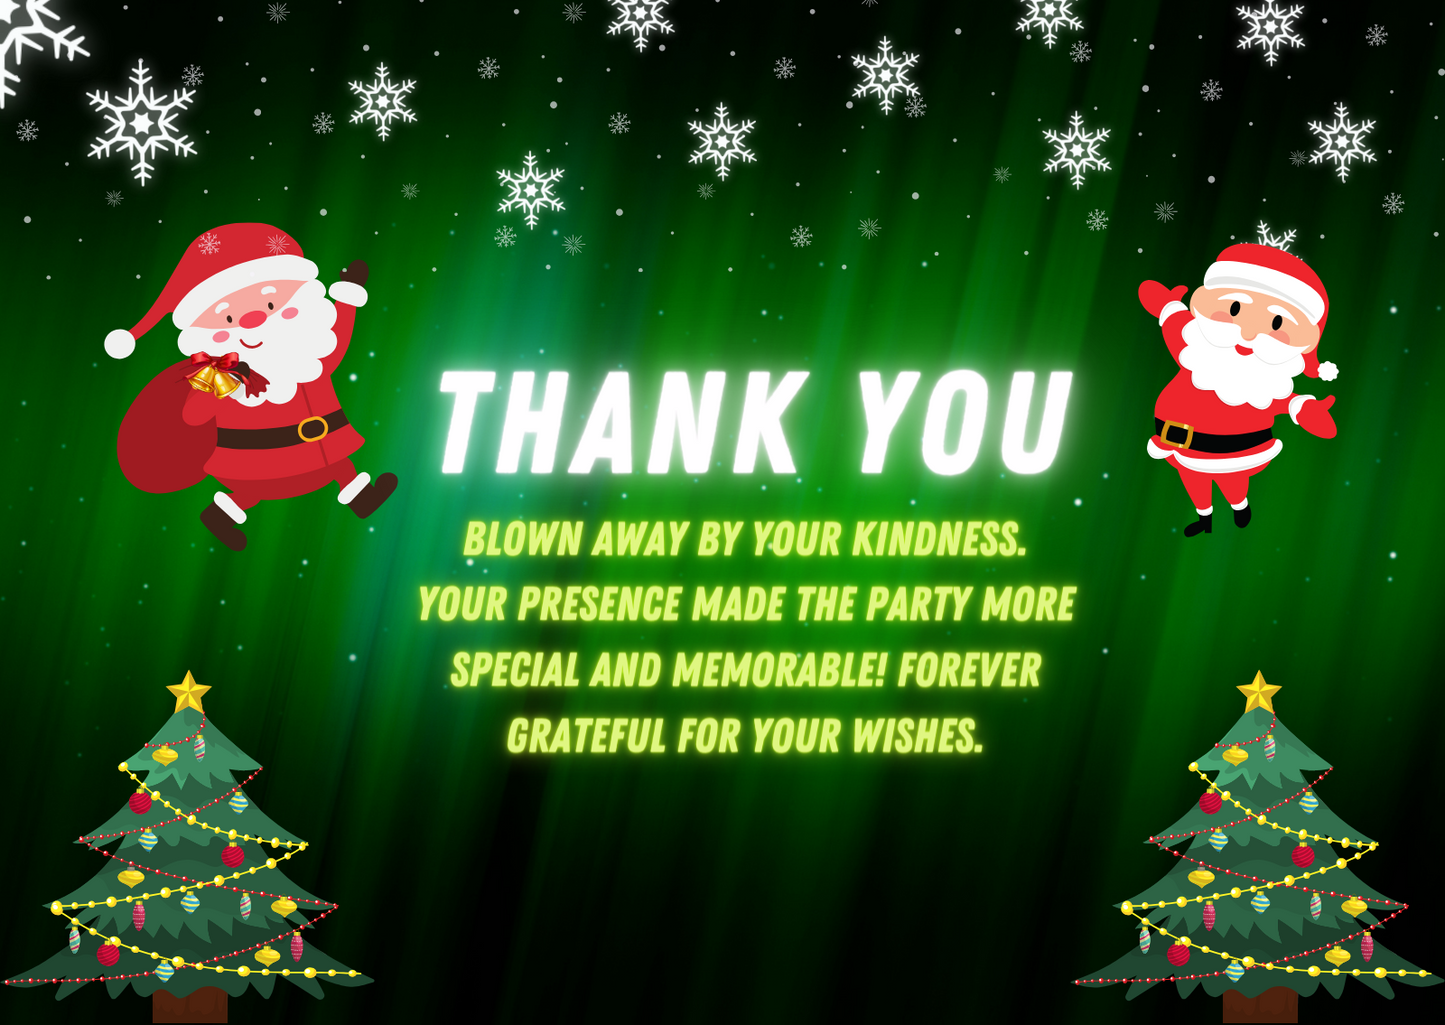 Merry Christmas Night Party Thank You Card